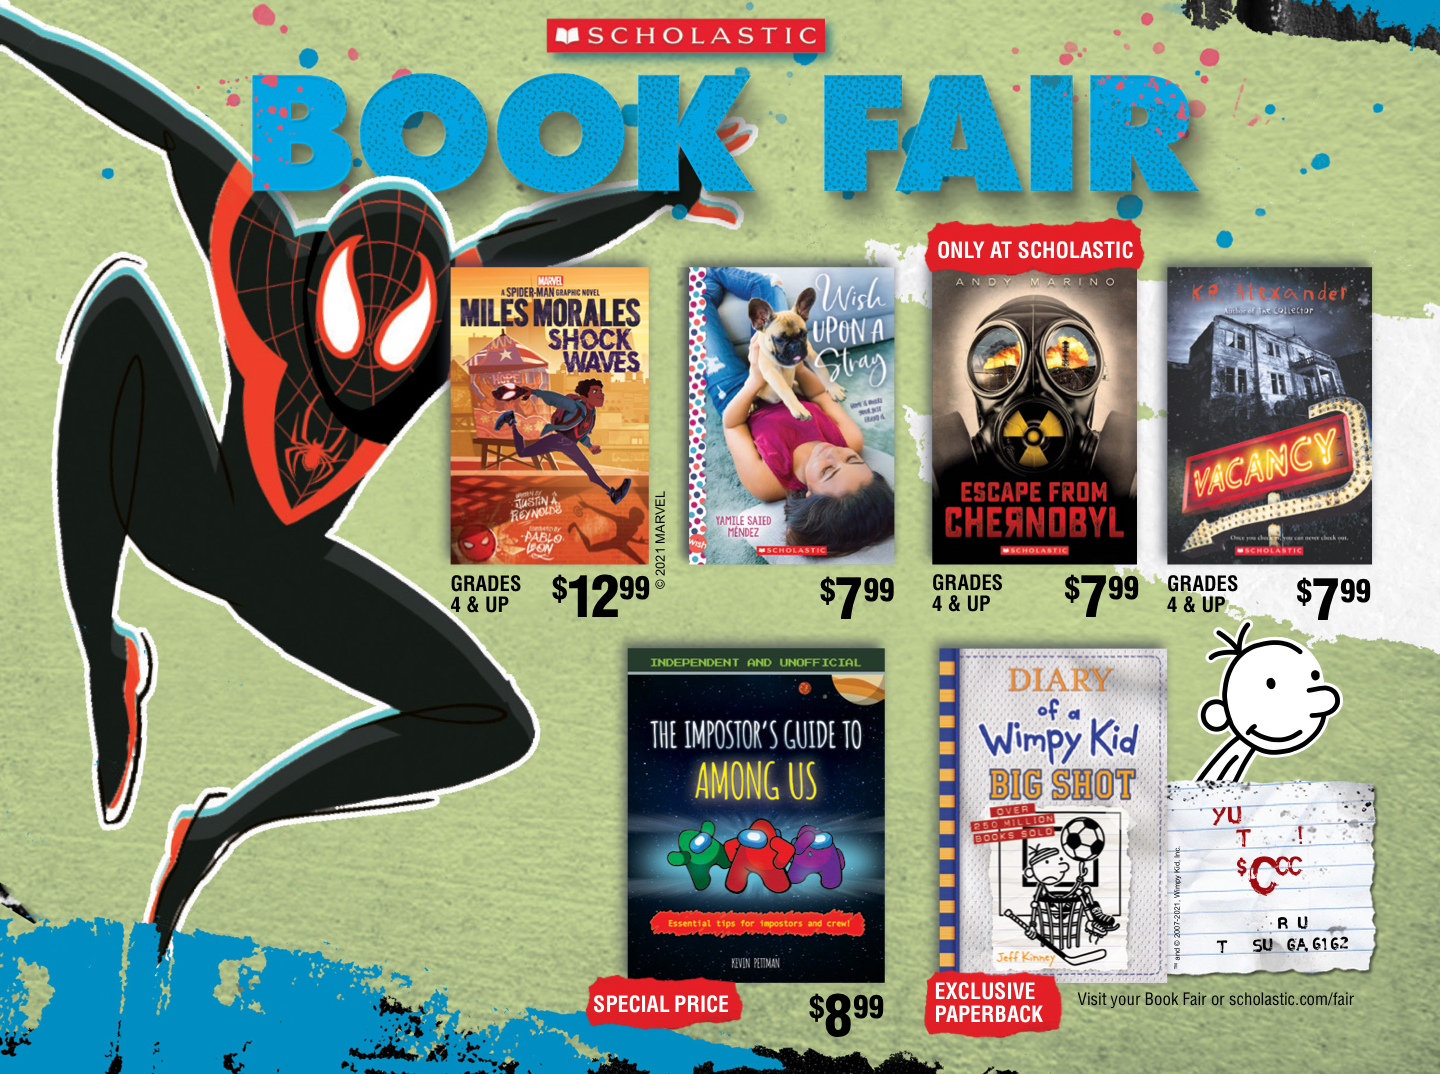 Scholastic Book Fair grapples with diverse titles amid a rise in